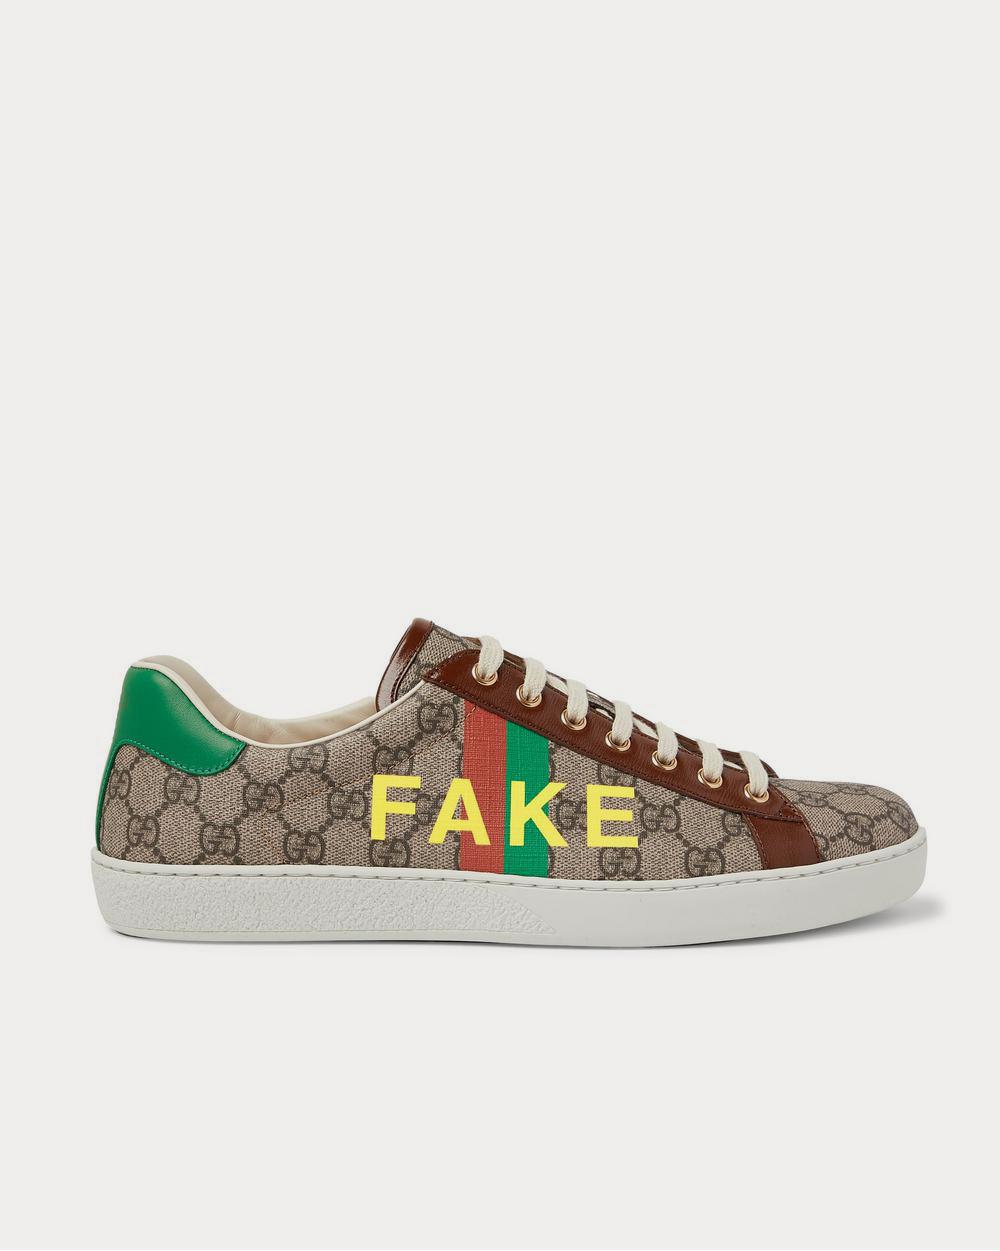 Gucci - Ace Printed Leather-Trimmed Monogrammed Coated-Canvas  Brown low top sneakers